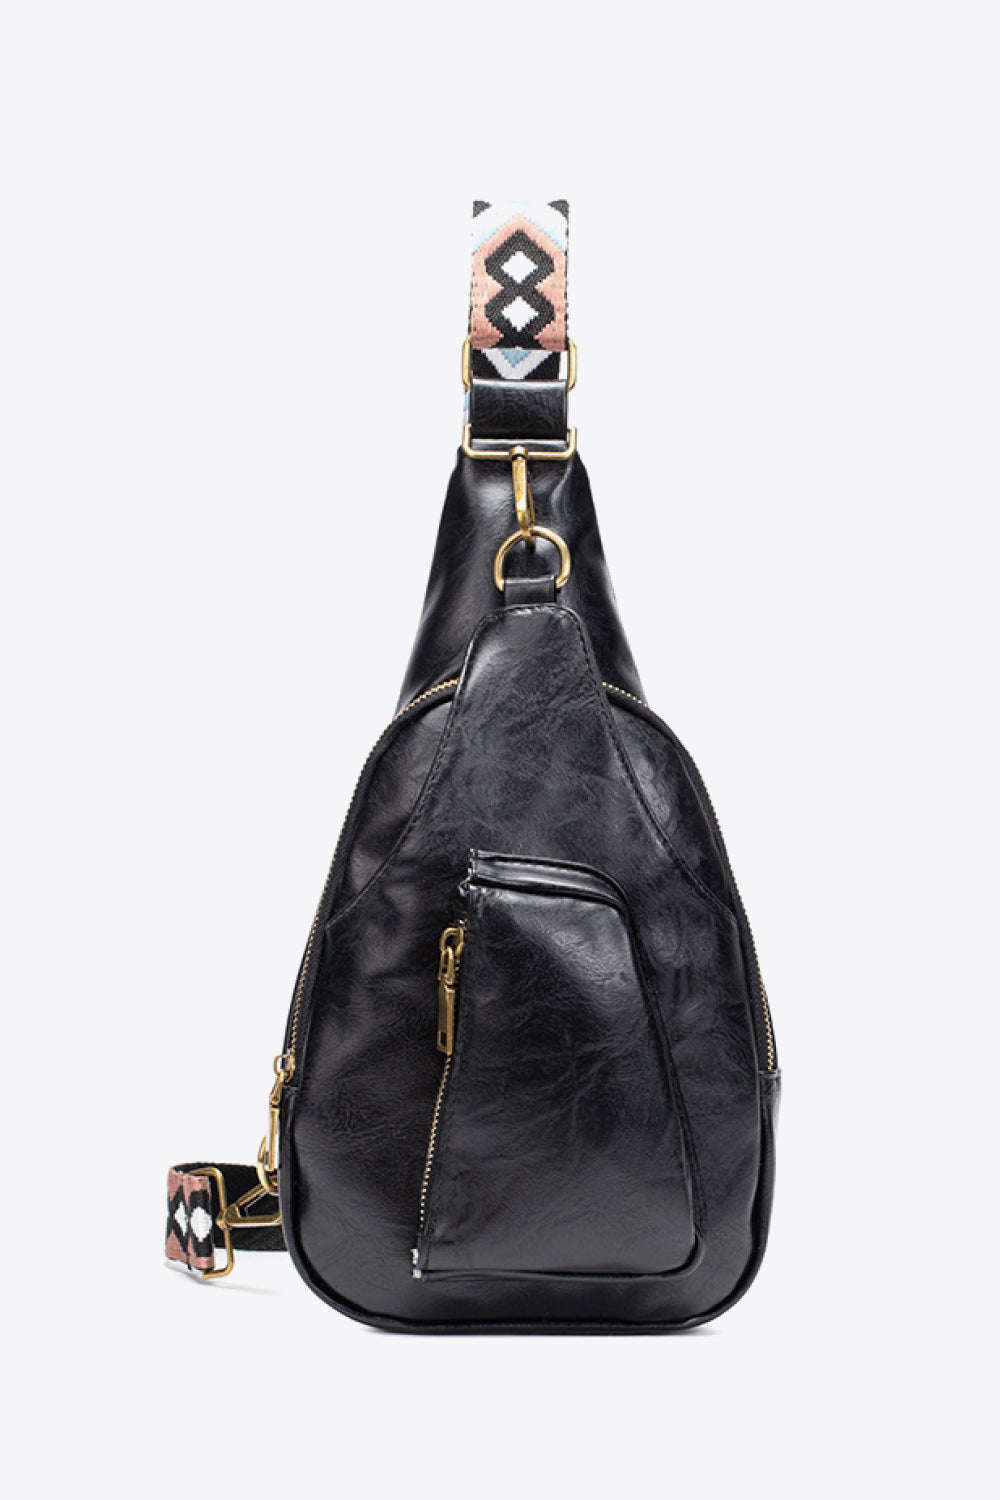 Dark Slate Gray All The Feels PU Leather Sling Bag Sentient Beauty Fashions bags &amp; totes